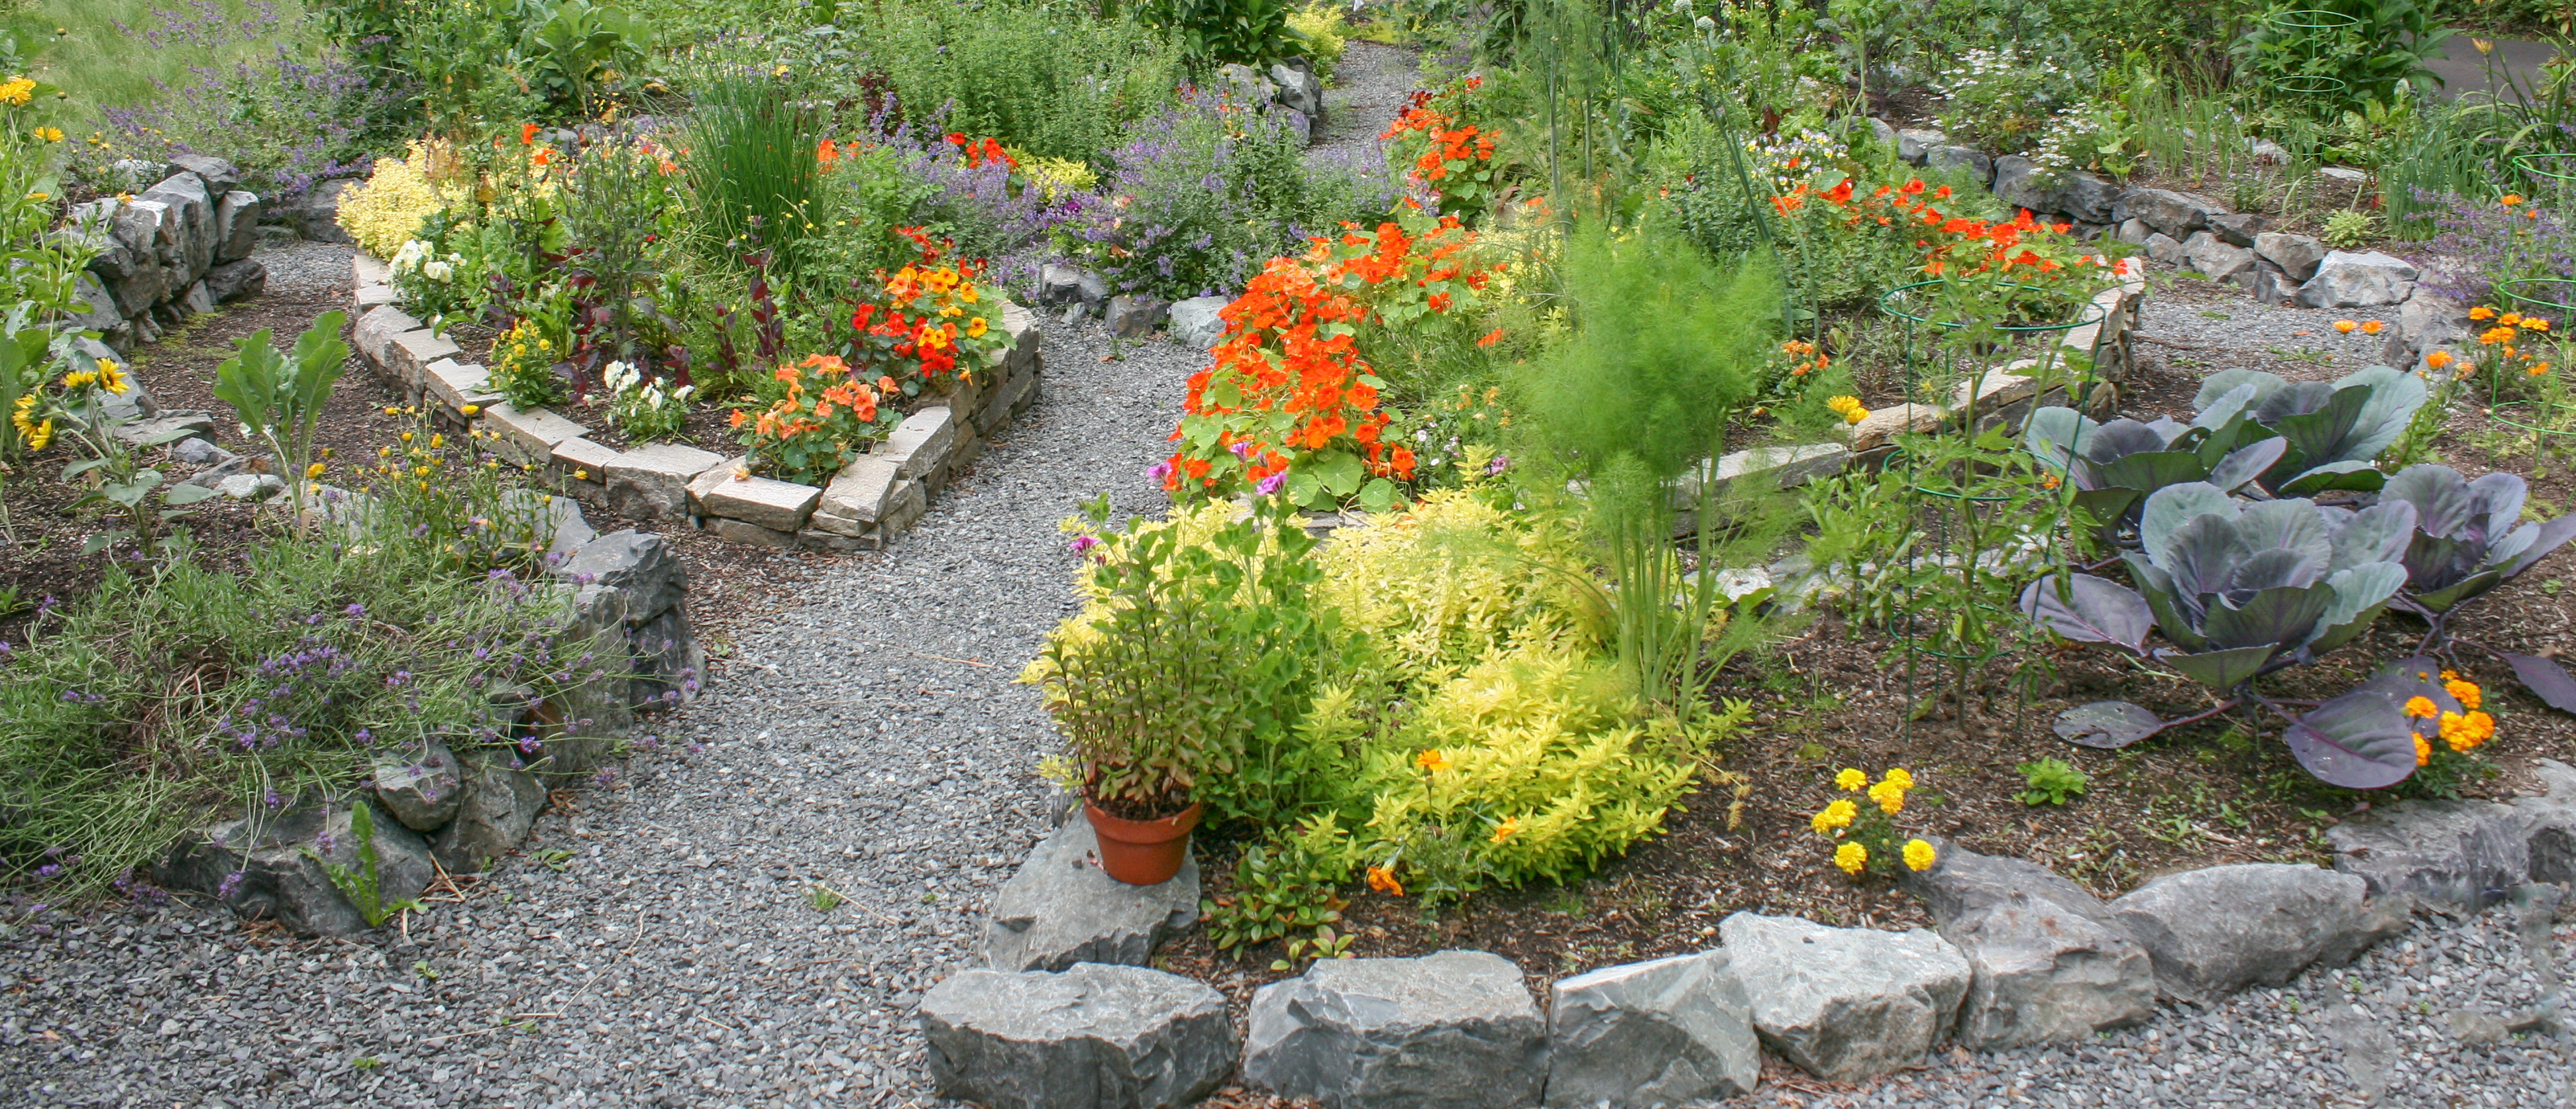 A cultivated garden pathway.